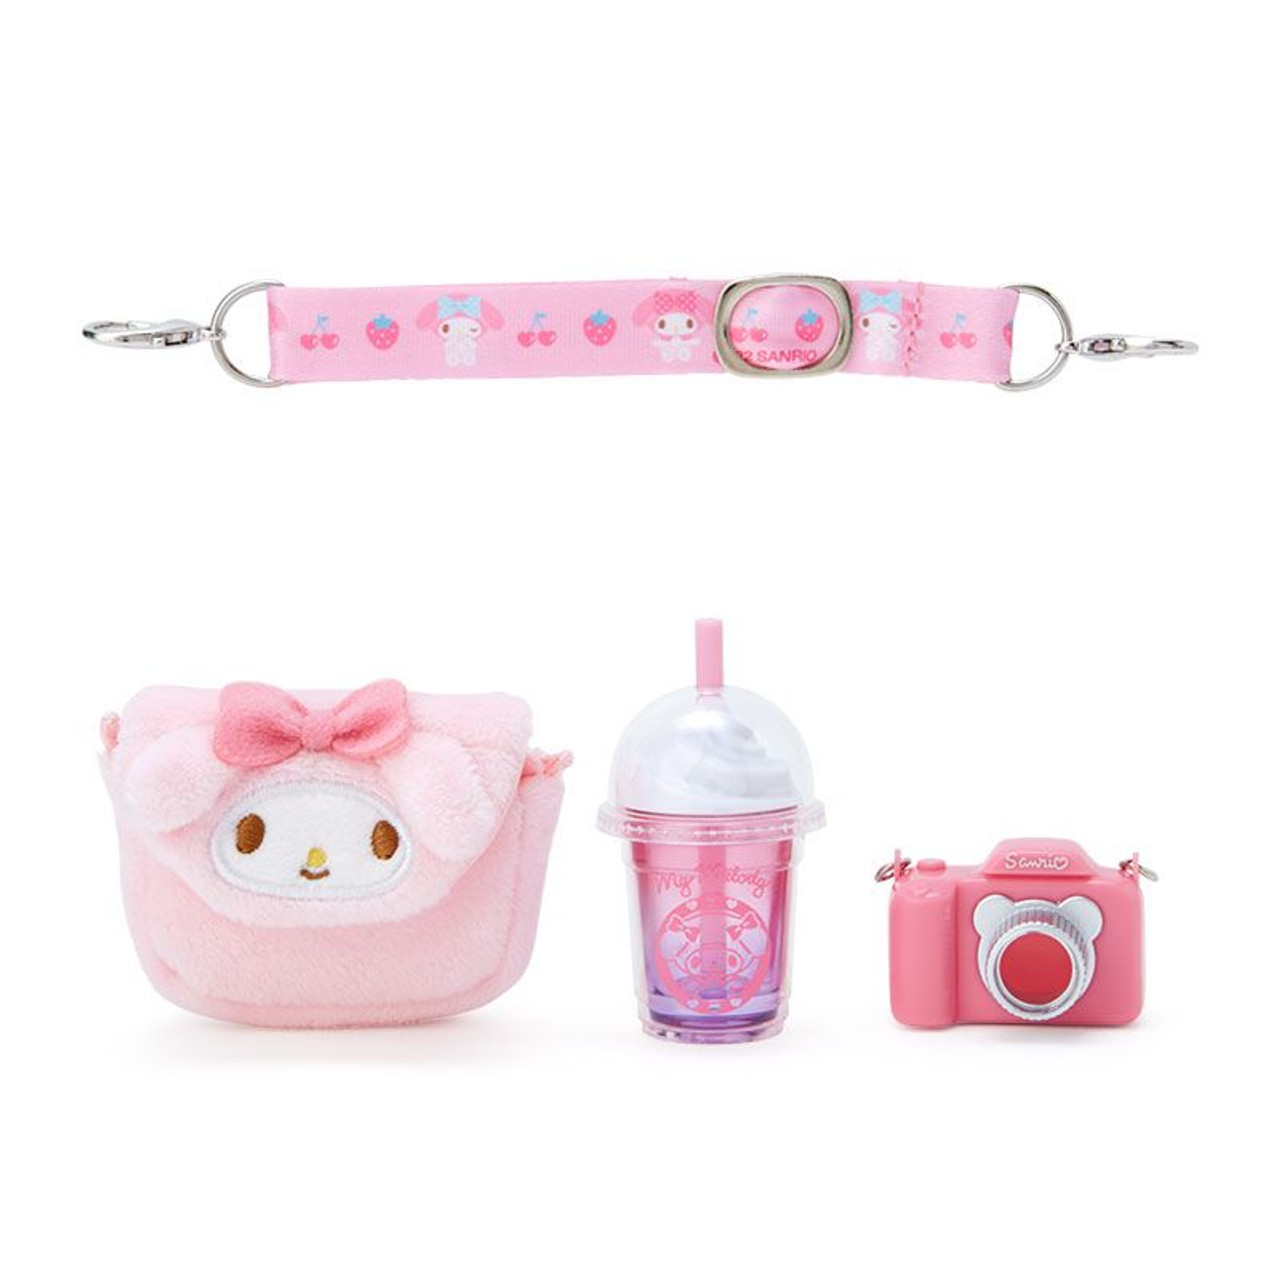 Accessory Set for Plush Toy My Melody (Pitatto Friends)